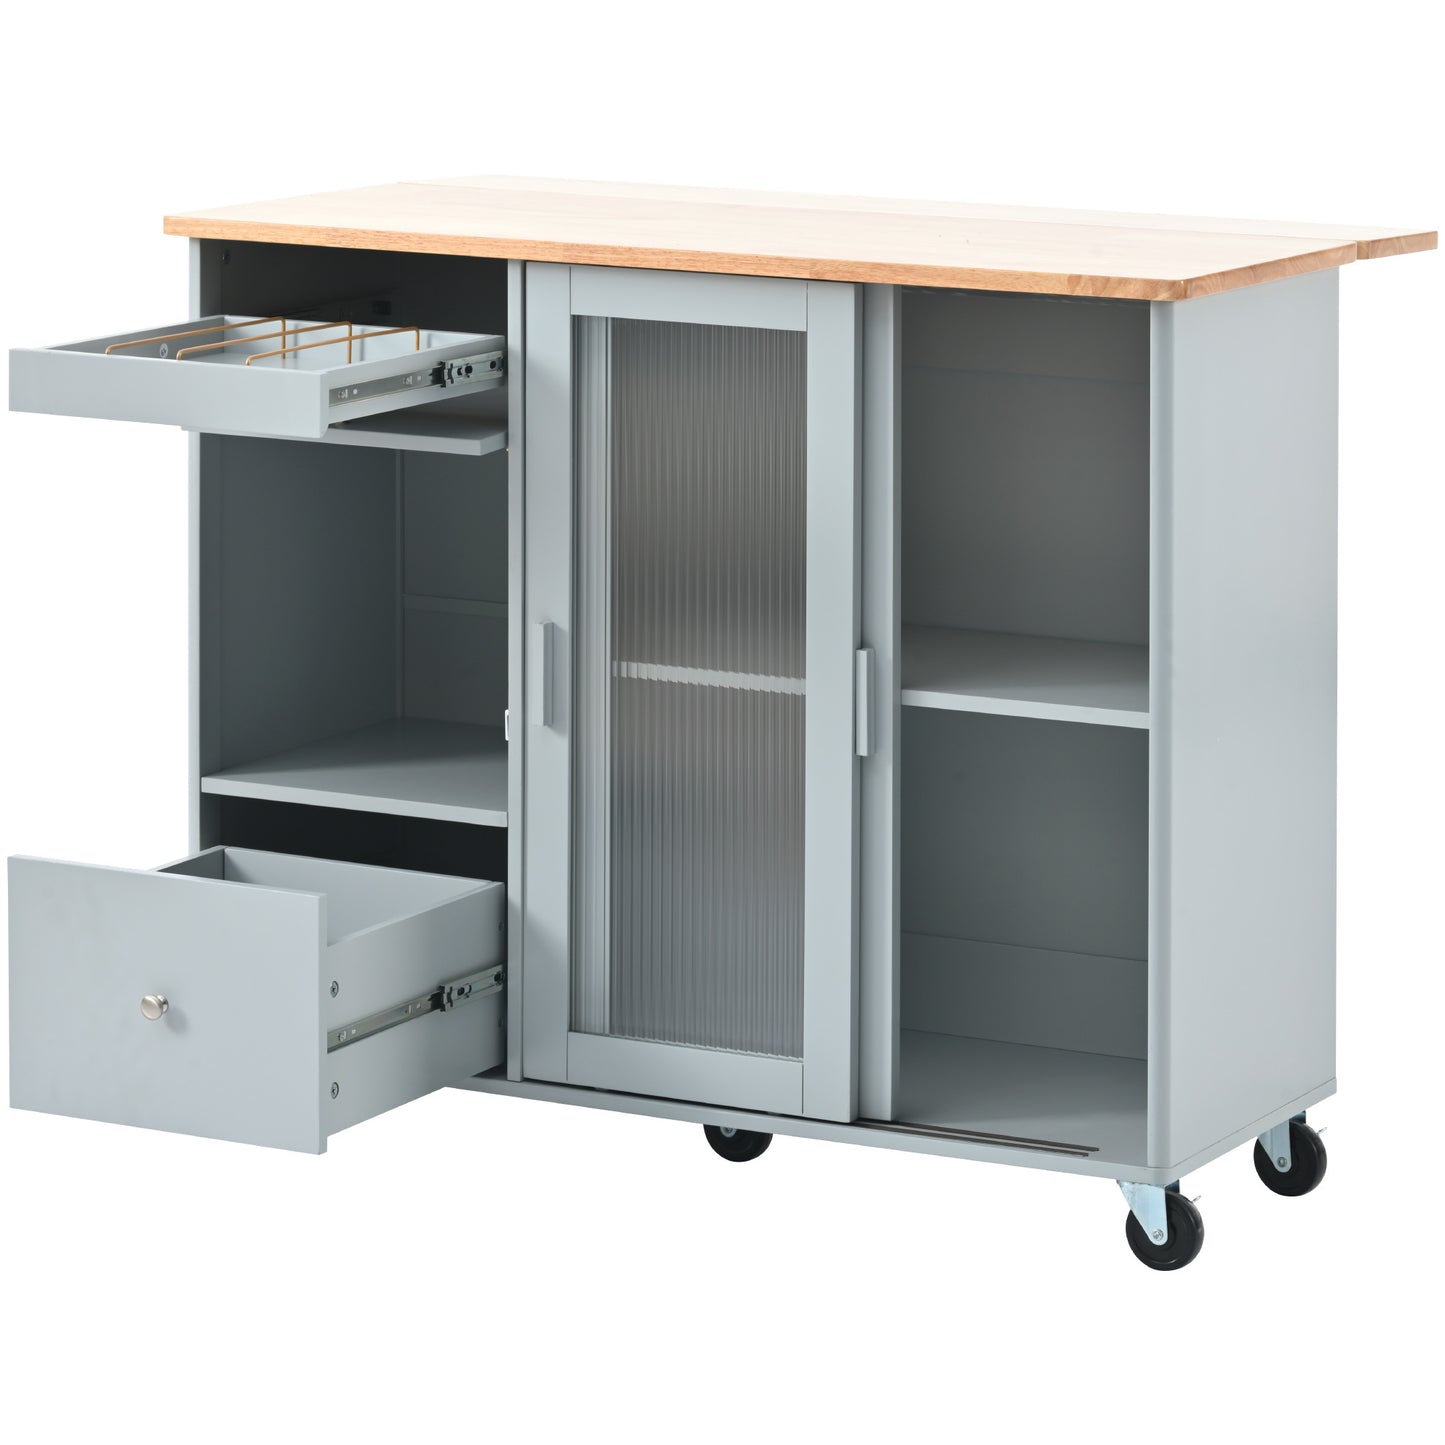 Kitchen Island with Drop Leaf, LED Light Kitchen Cart on Wheels with 2 Fluted Glass Doors and 1 Flip Cabinet Door, Large Kitchen Island Cart with an Adjustable Shelf and 2 Drawers (Grey Blue)